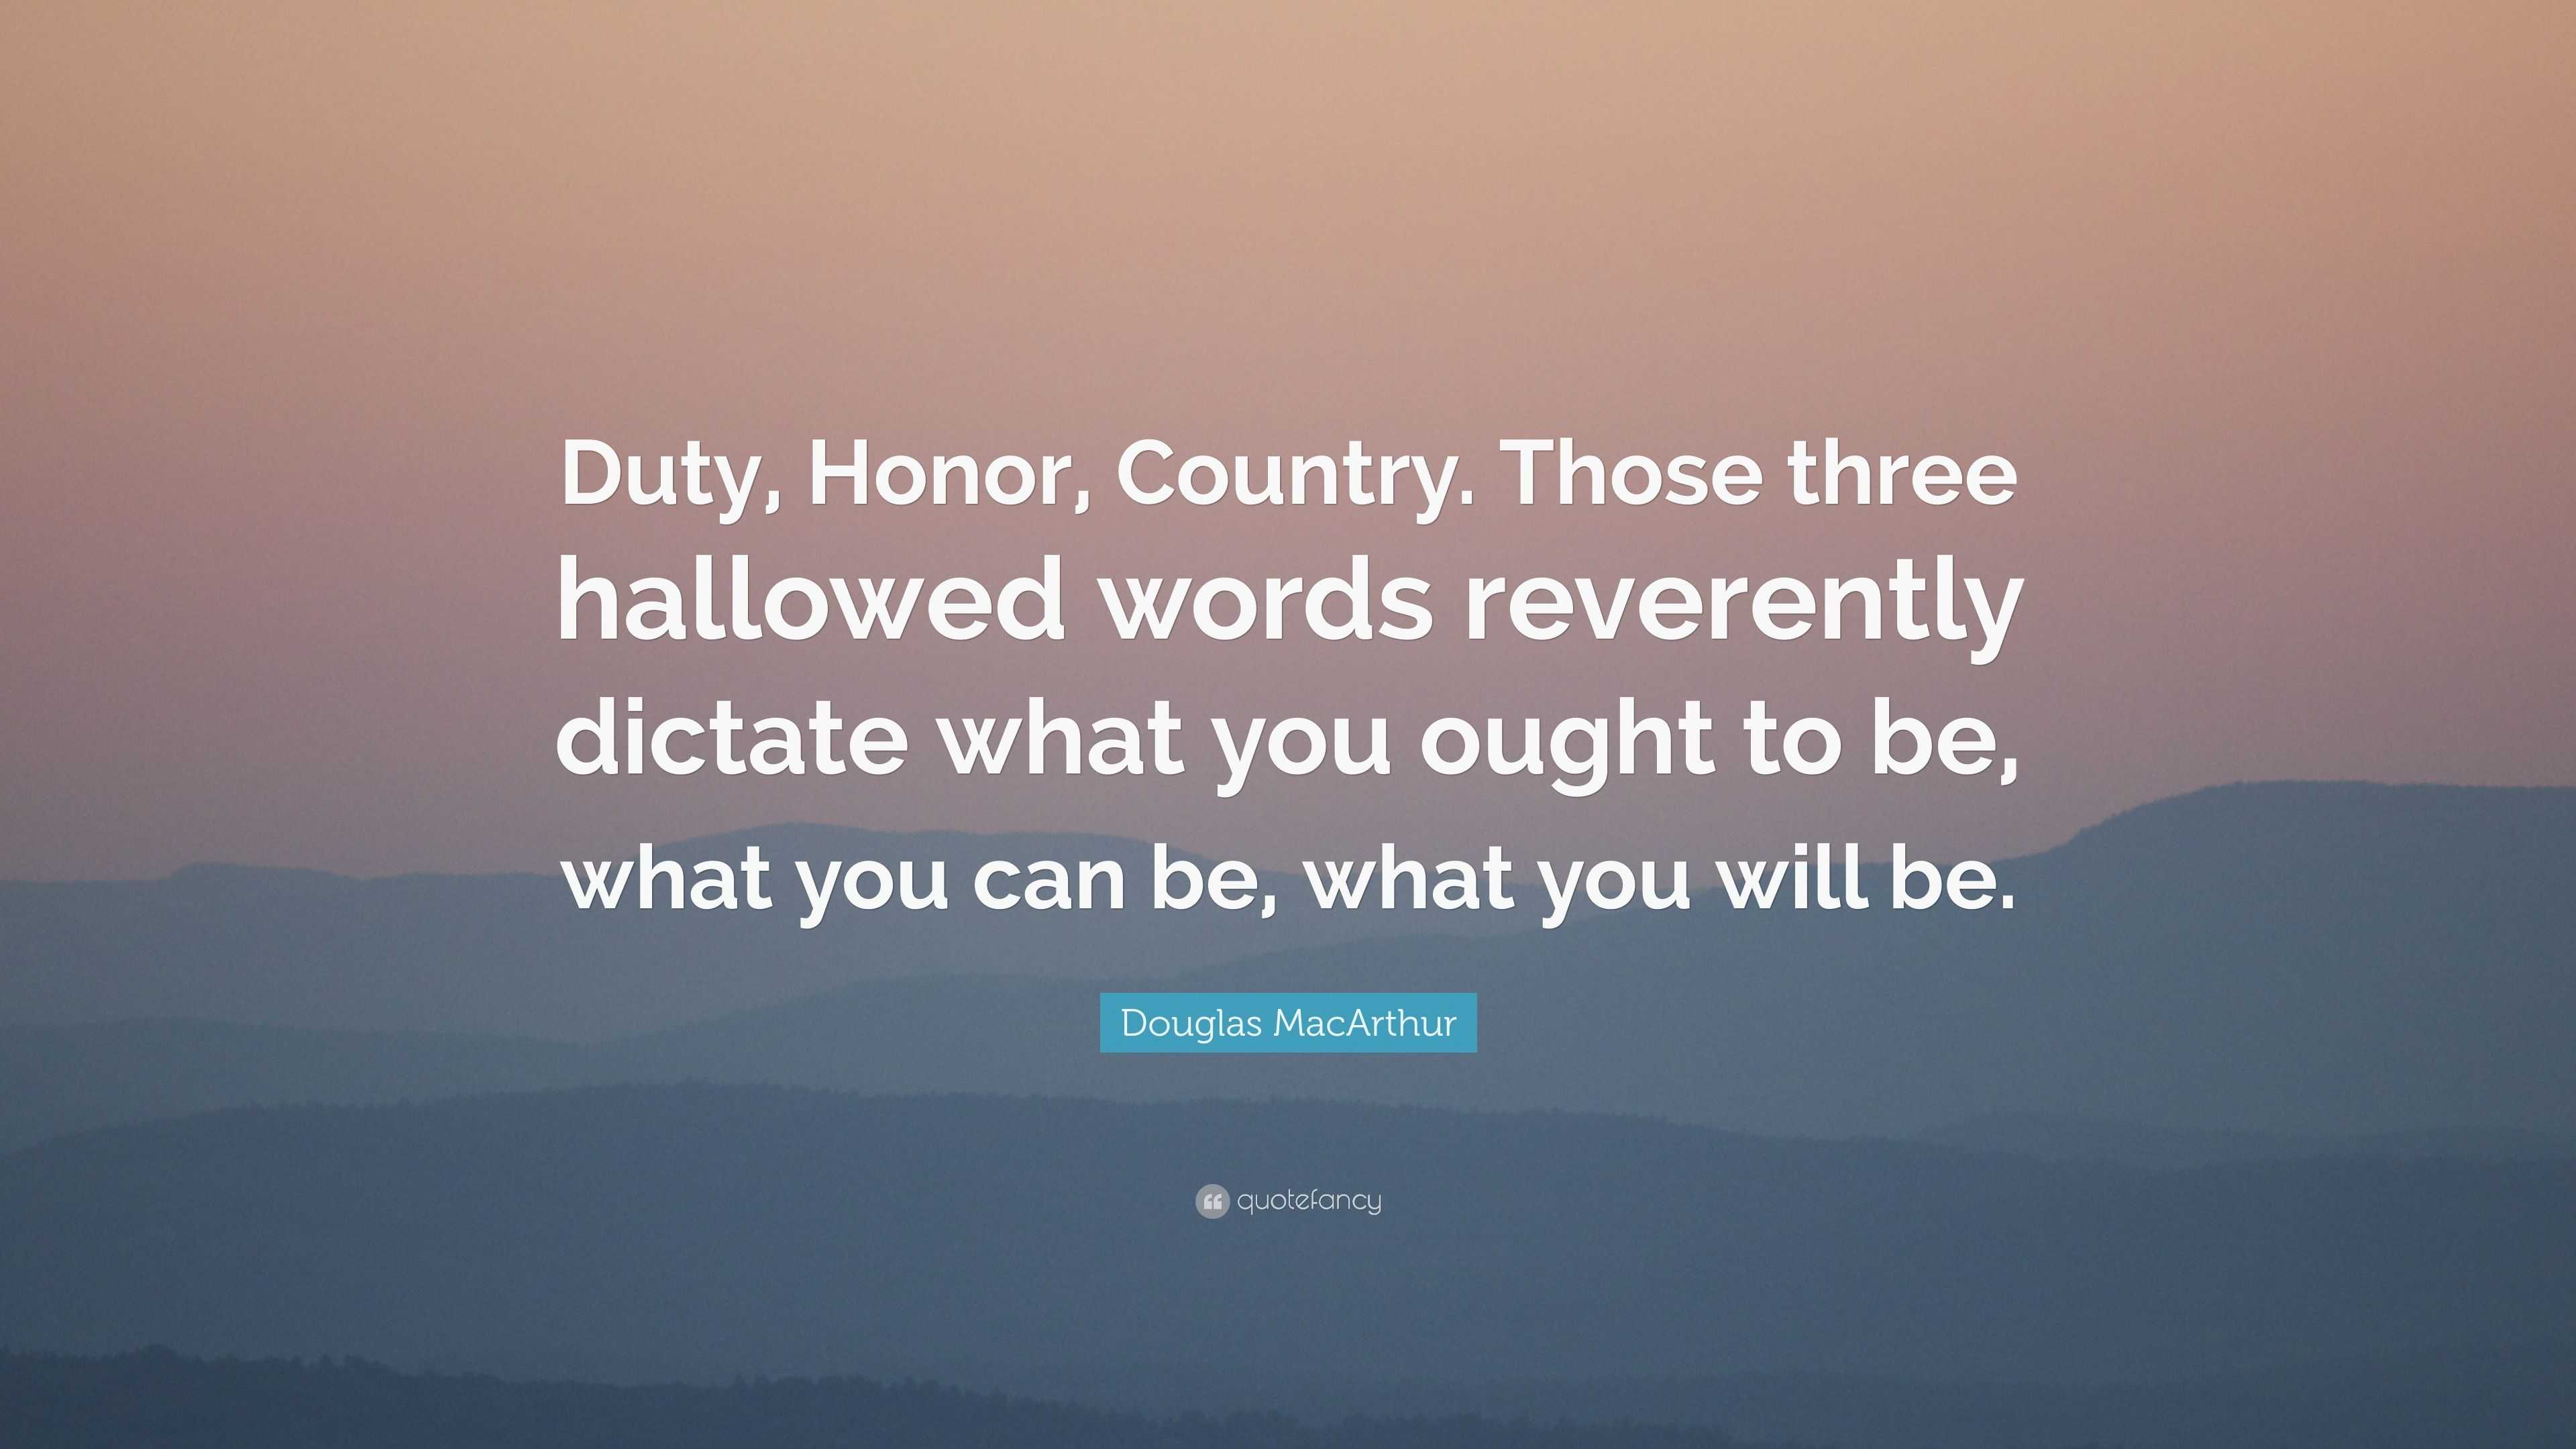 Duty, Honor, Country by Douglas MacArthur